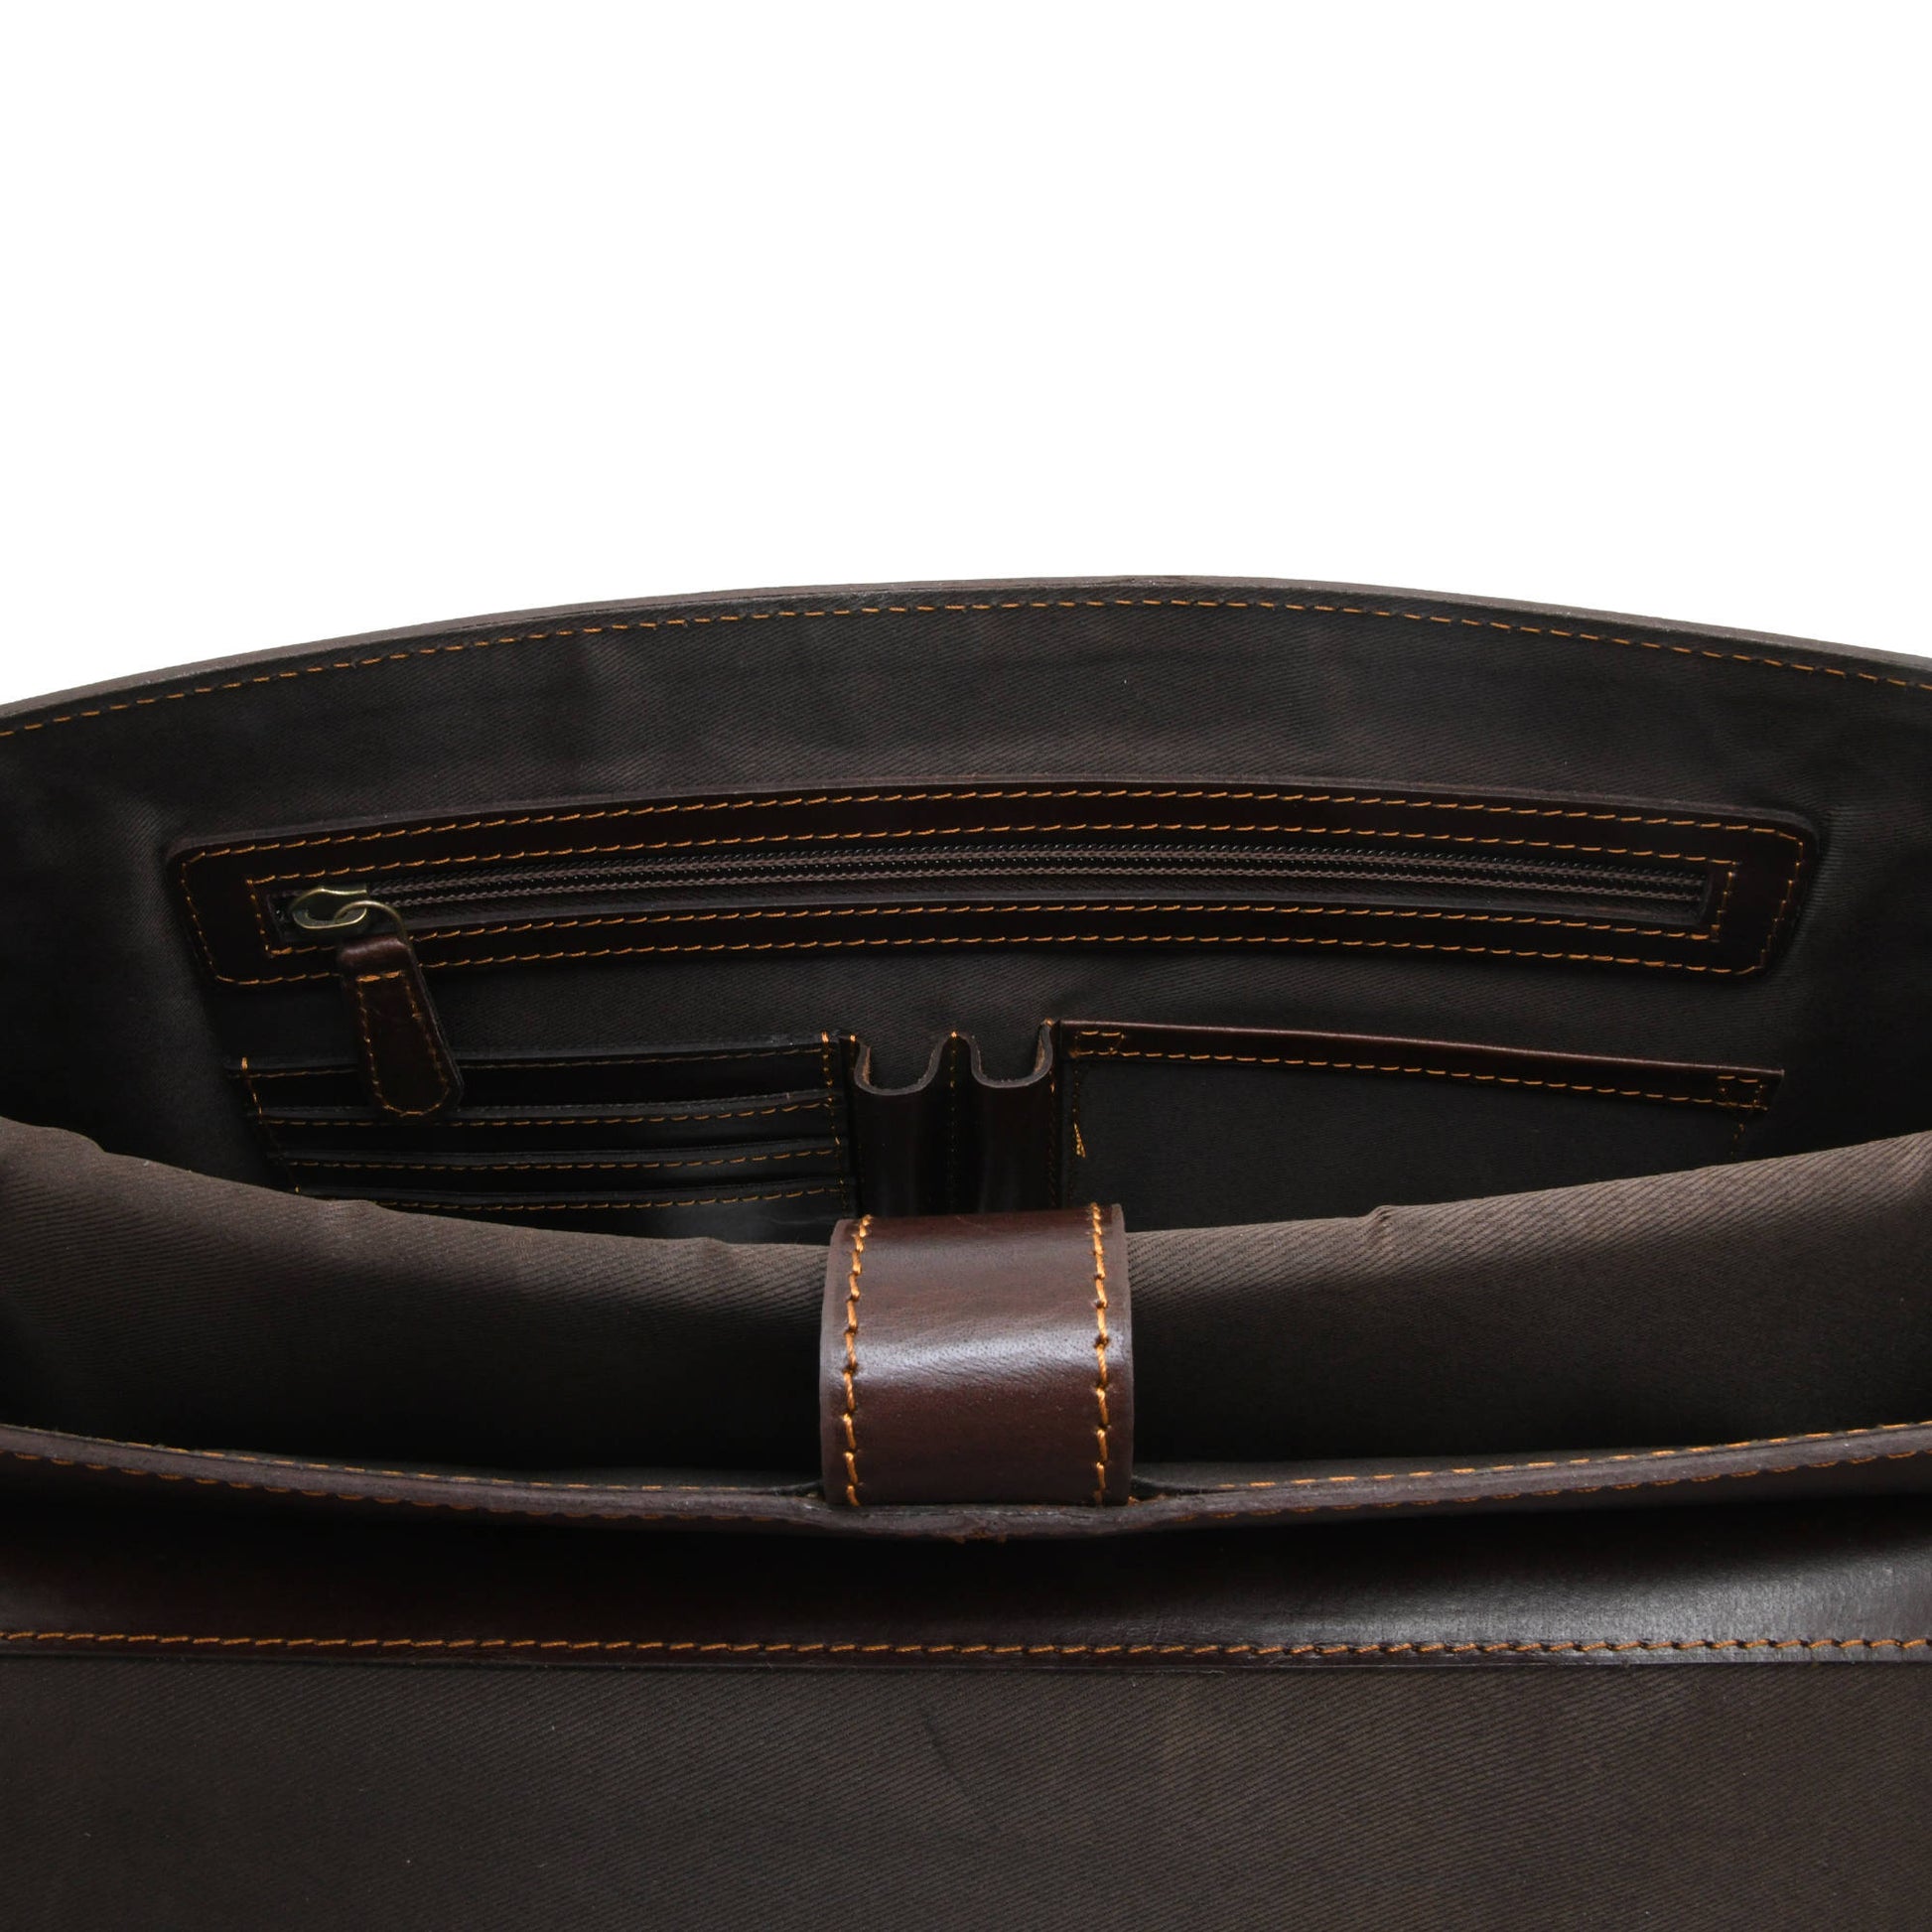 Style n Craft 392007 Portfolio Bag in Full Grain Dark Brown Leather - Inside Front Wall Pockets - Closeup View